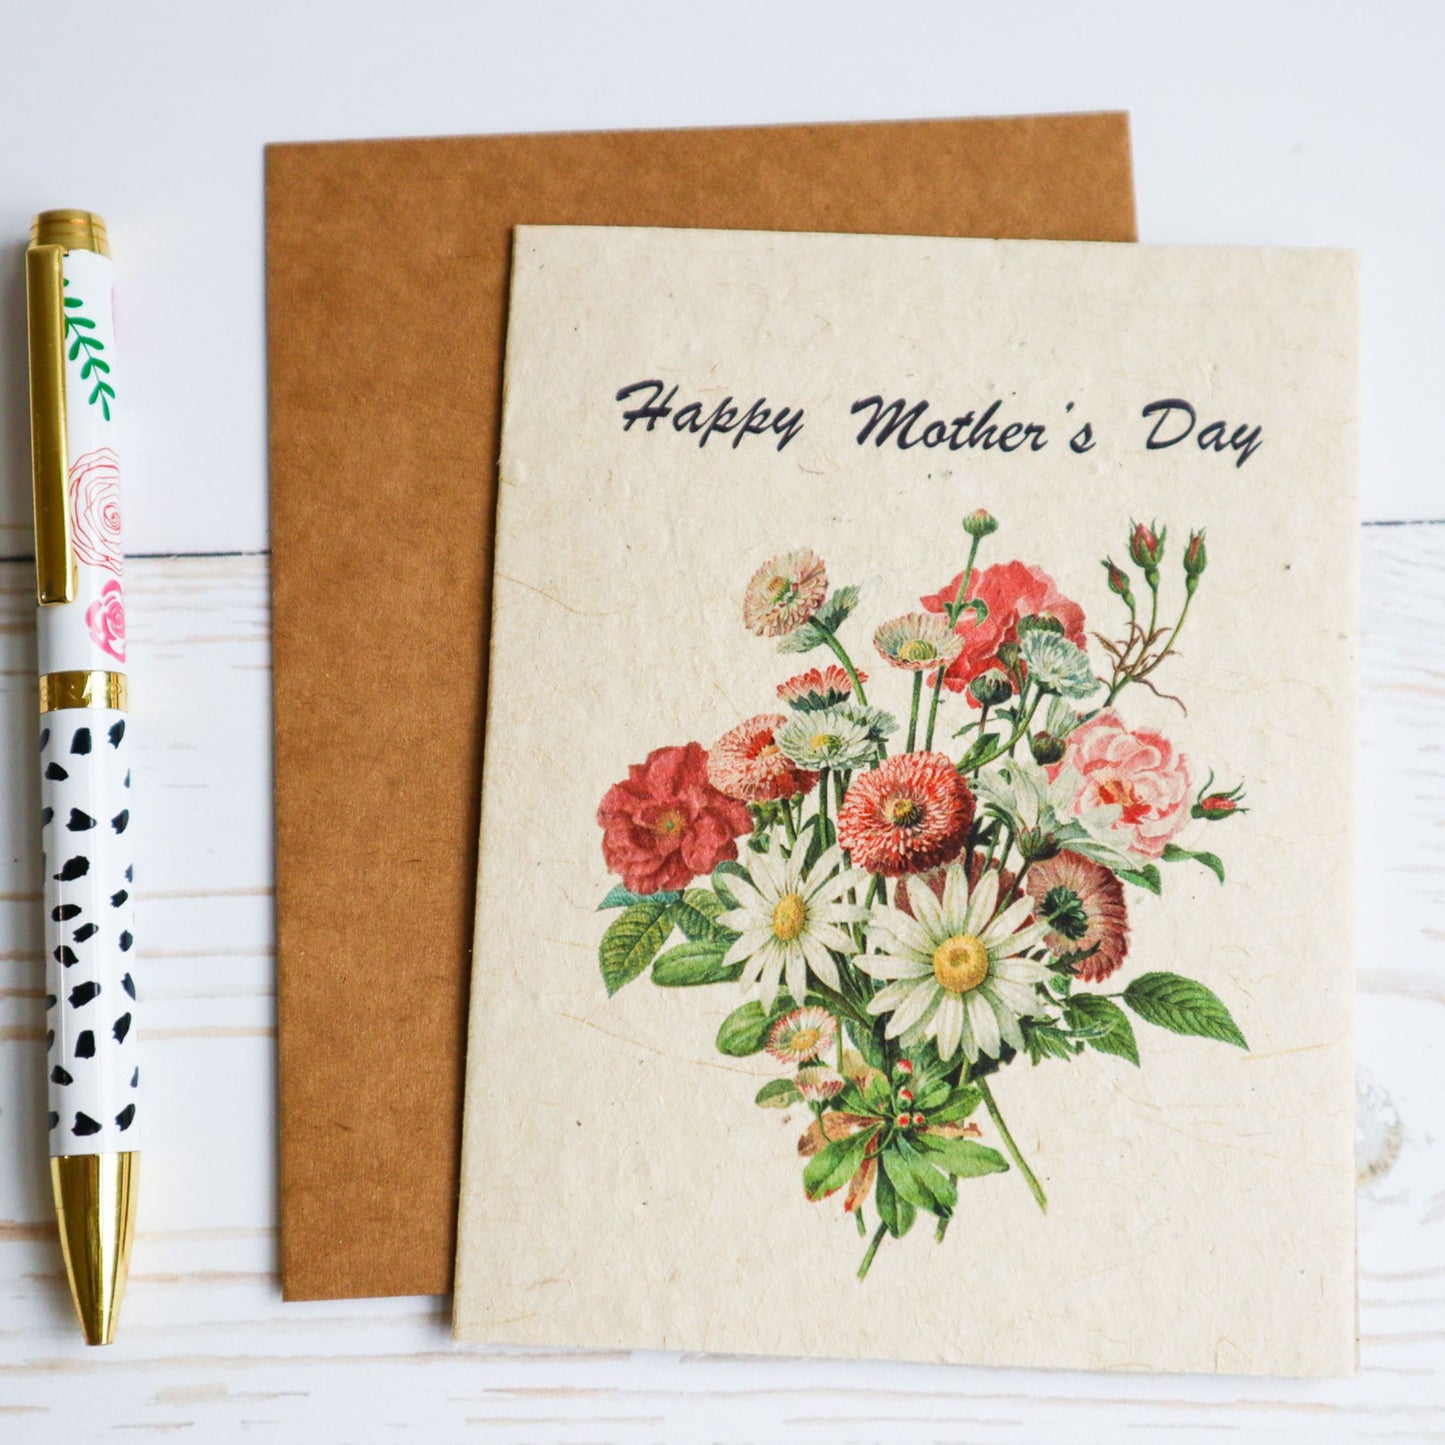 Happy Mother's Day plantable flower seed paper card with floral bouquet and kraft envelope with writing pen.